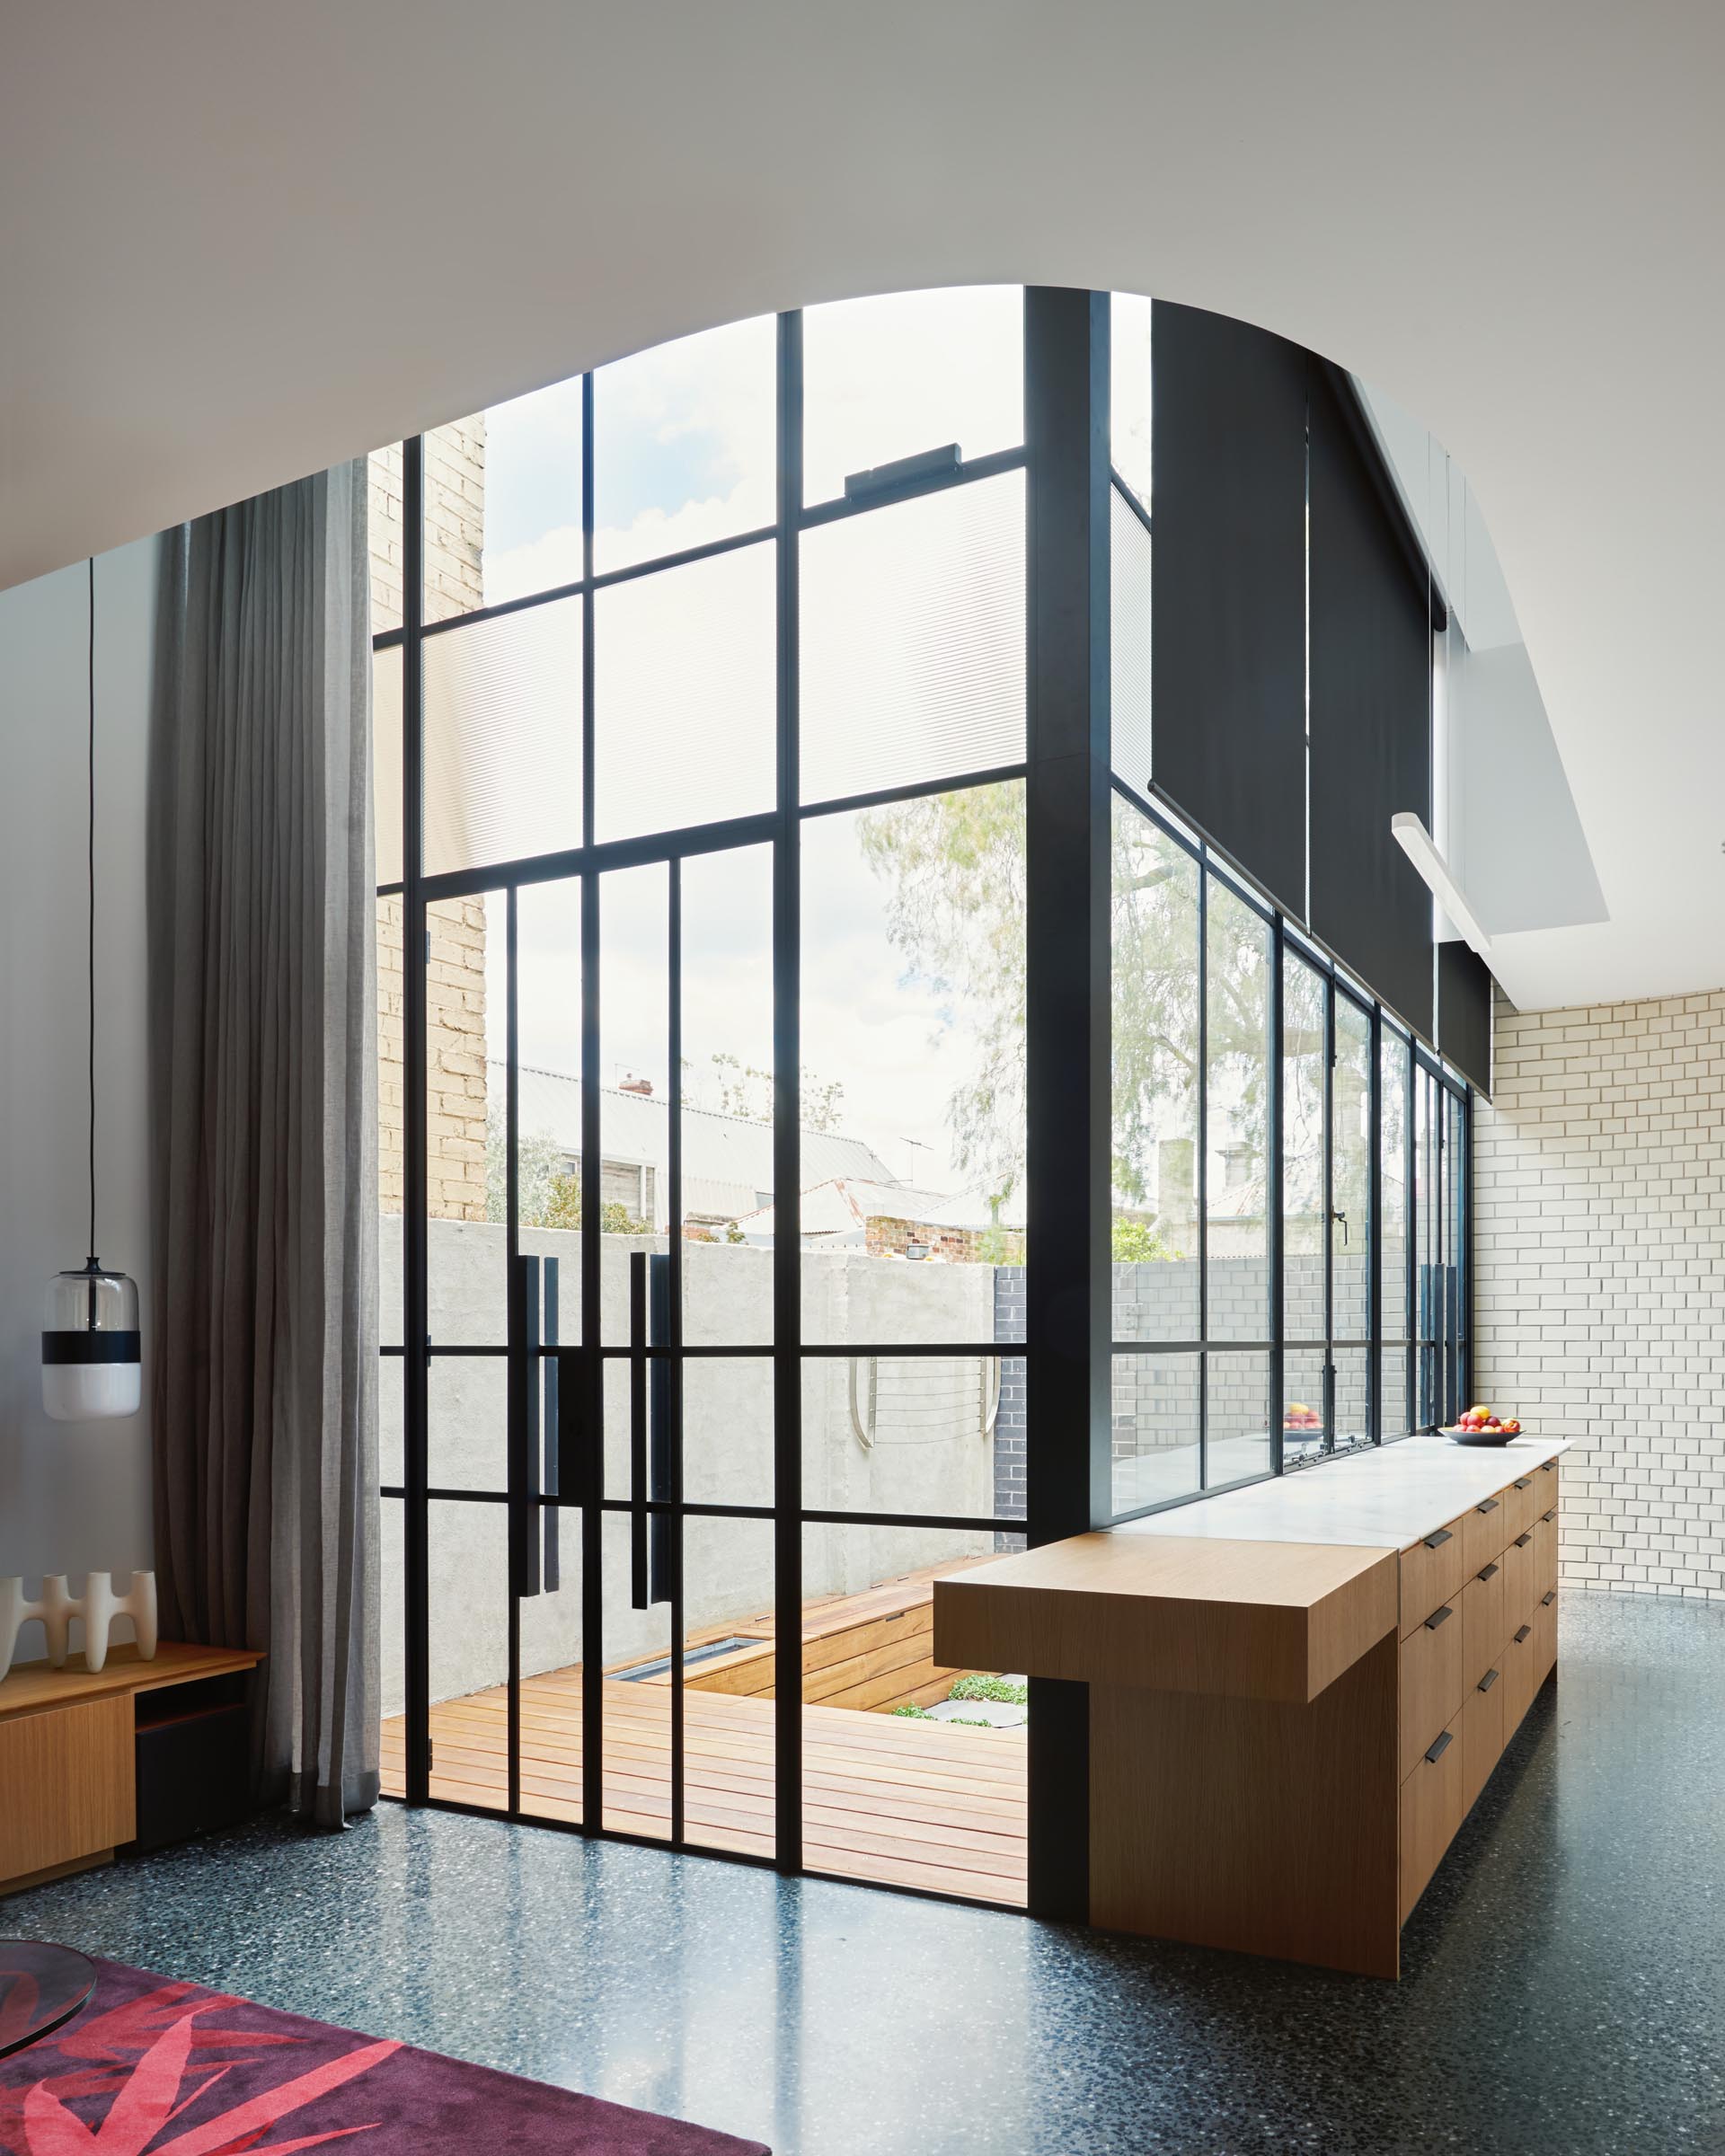 Black framed glass doors which blend into the glass walls, help to create an abundance of natural light that filters through to the interior.